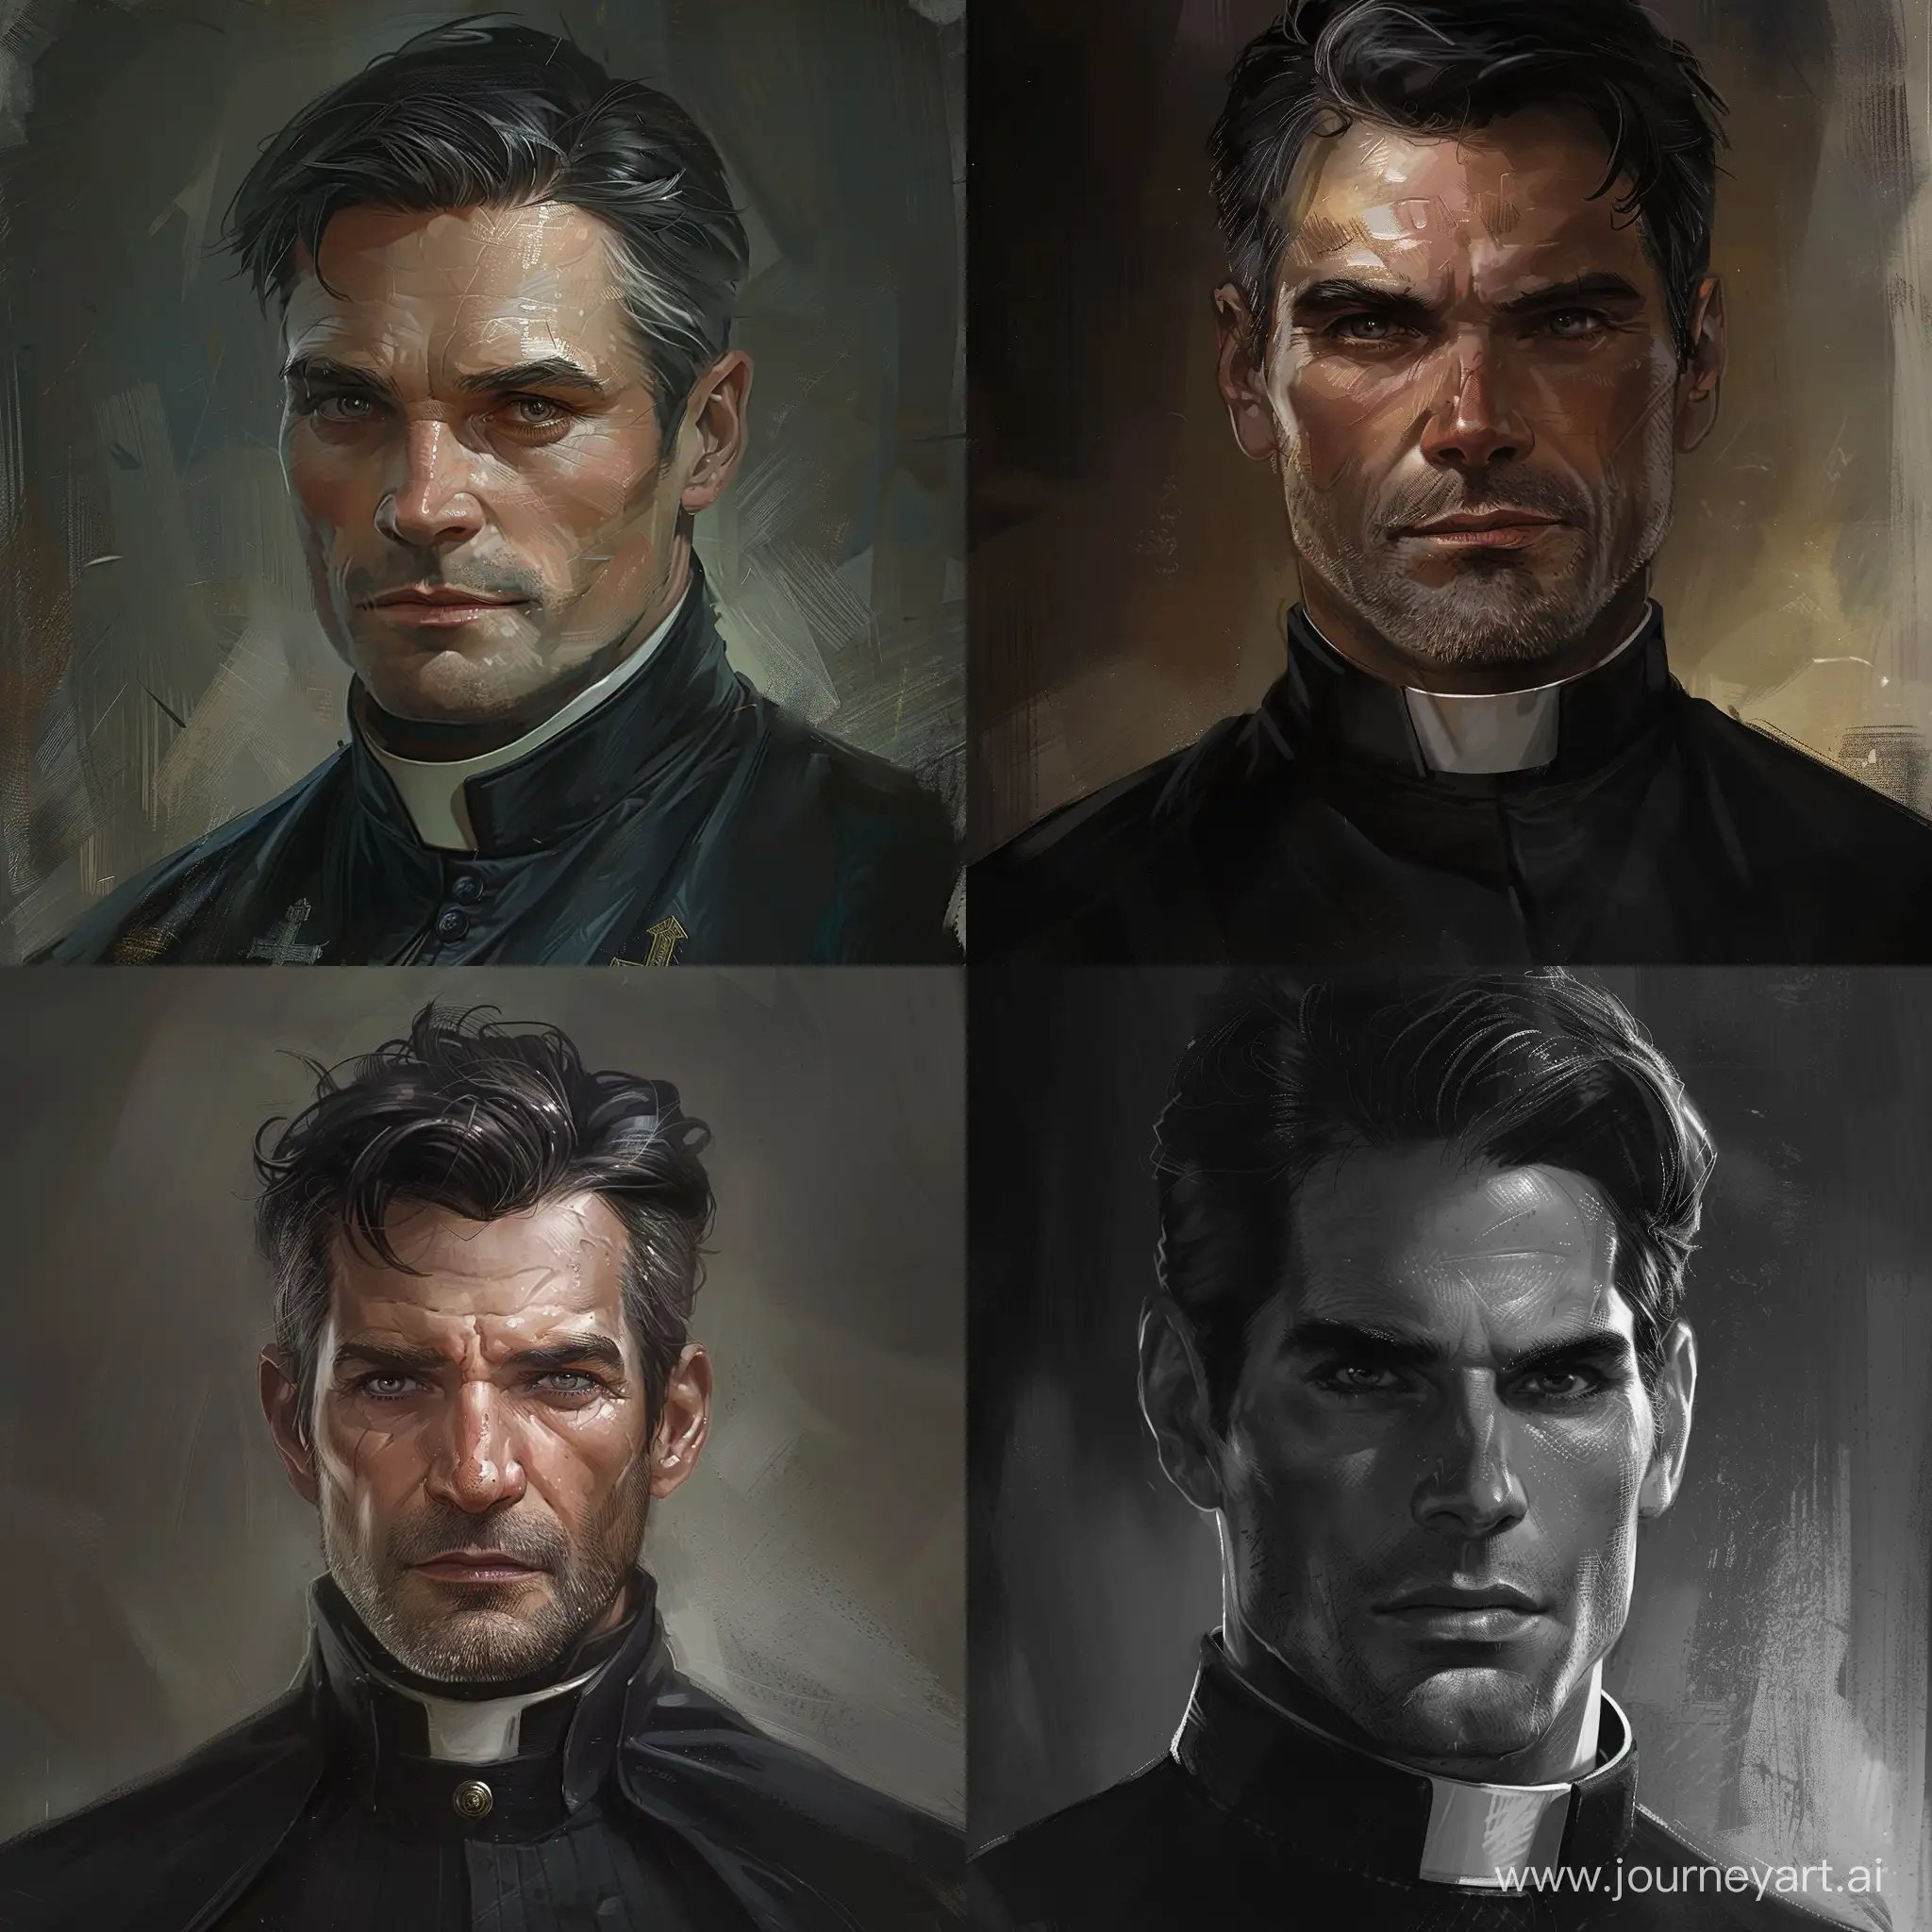 Serene-Priest-with-Penetrating-Gaze-and-Defined-Features